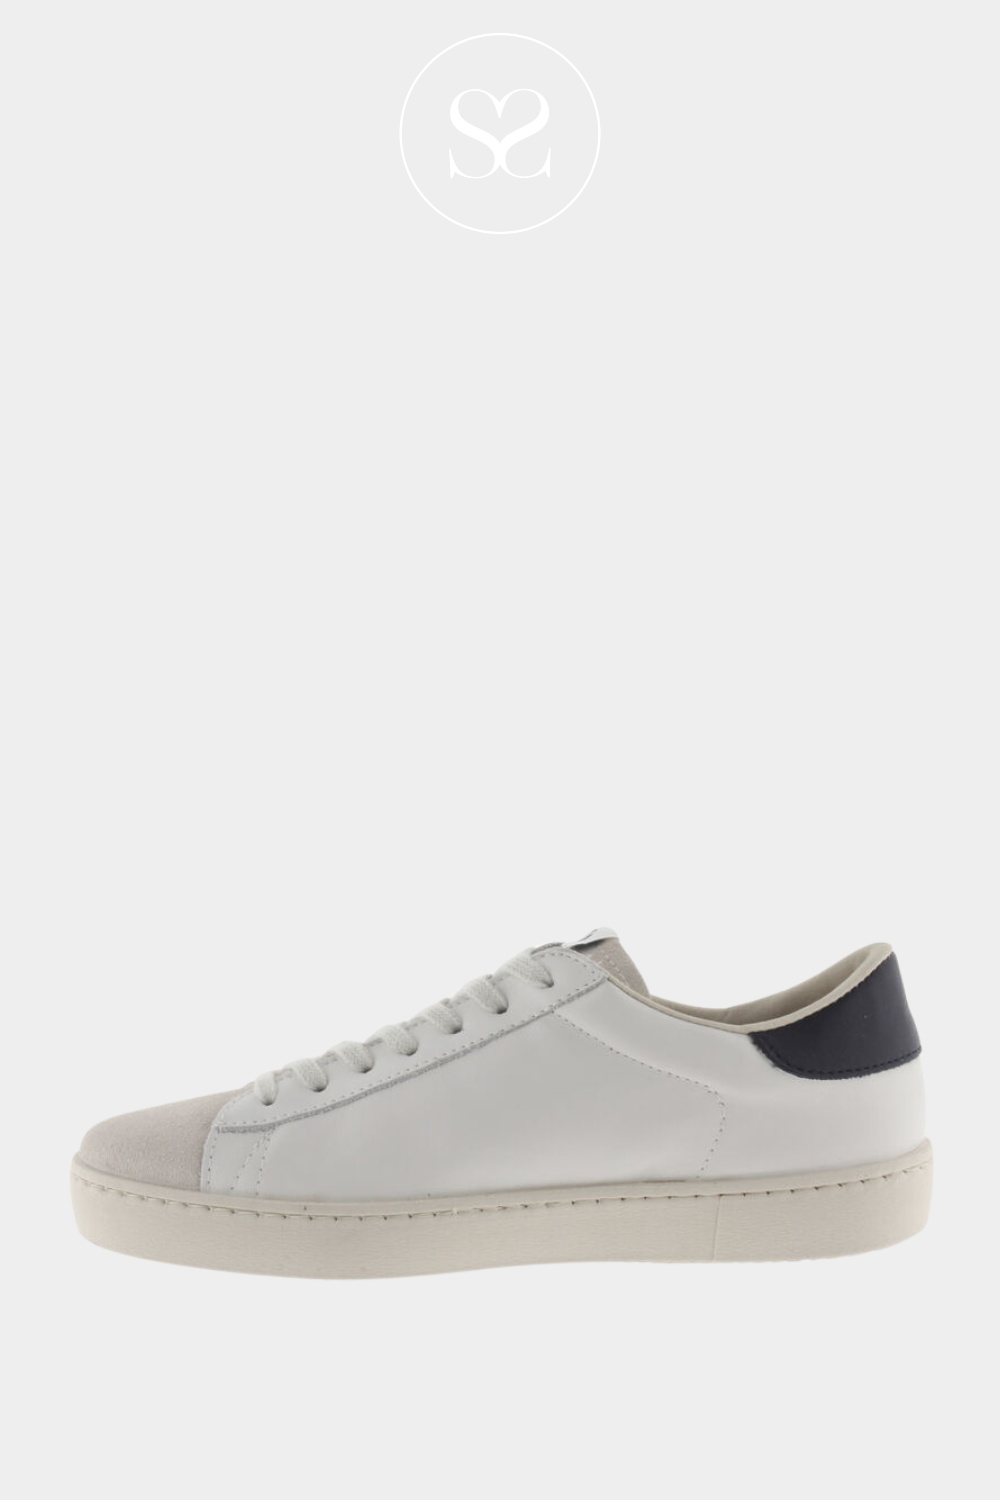 VICTORIA 126142 WHITE FLAT MINIMALISTIC TRAINER WITH NAVY V ON THE SIDE AND A SUEDE TOE